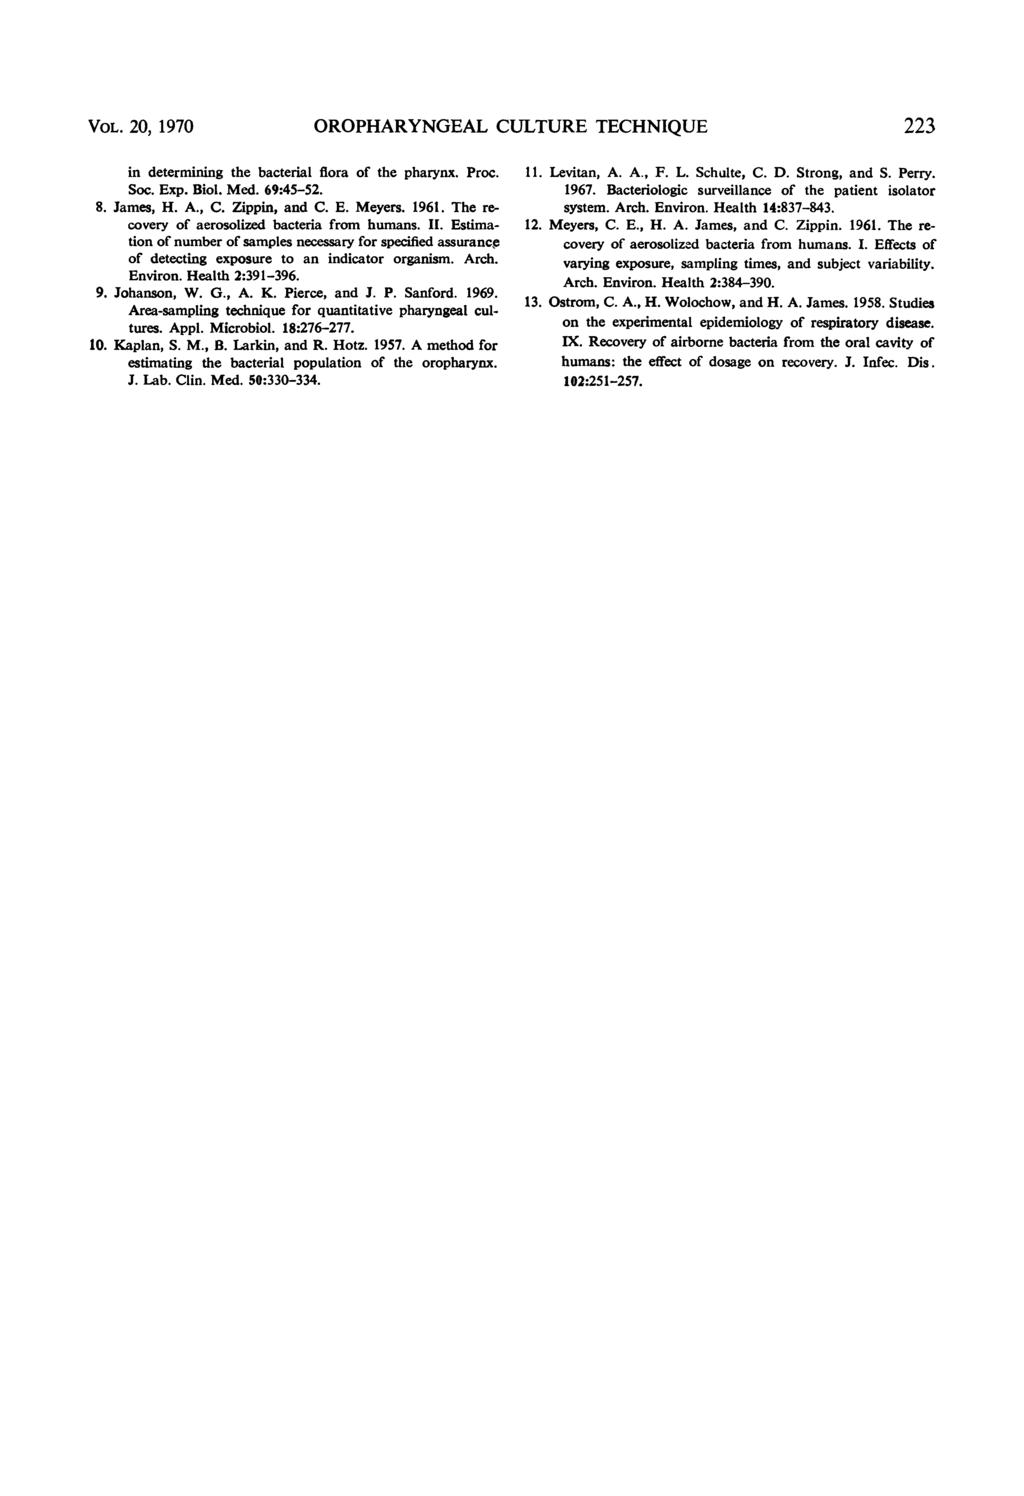 VOL. 20, 1970 OROPHARYNGEAL CULTURE TECHNIQUE 223 in determining the bacterial flora of the pharynx. Proc. Soc. Exp. Biol. Med. 69:45-52. 8. James, H. A., C. Zippin, and C. E. Meyers. 1961.